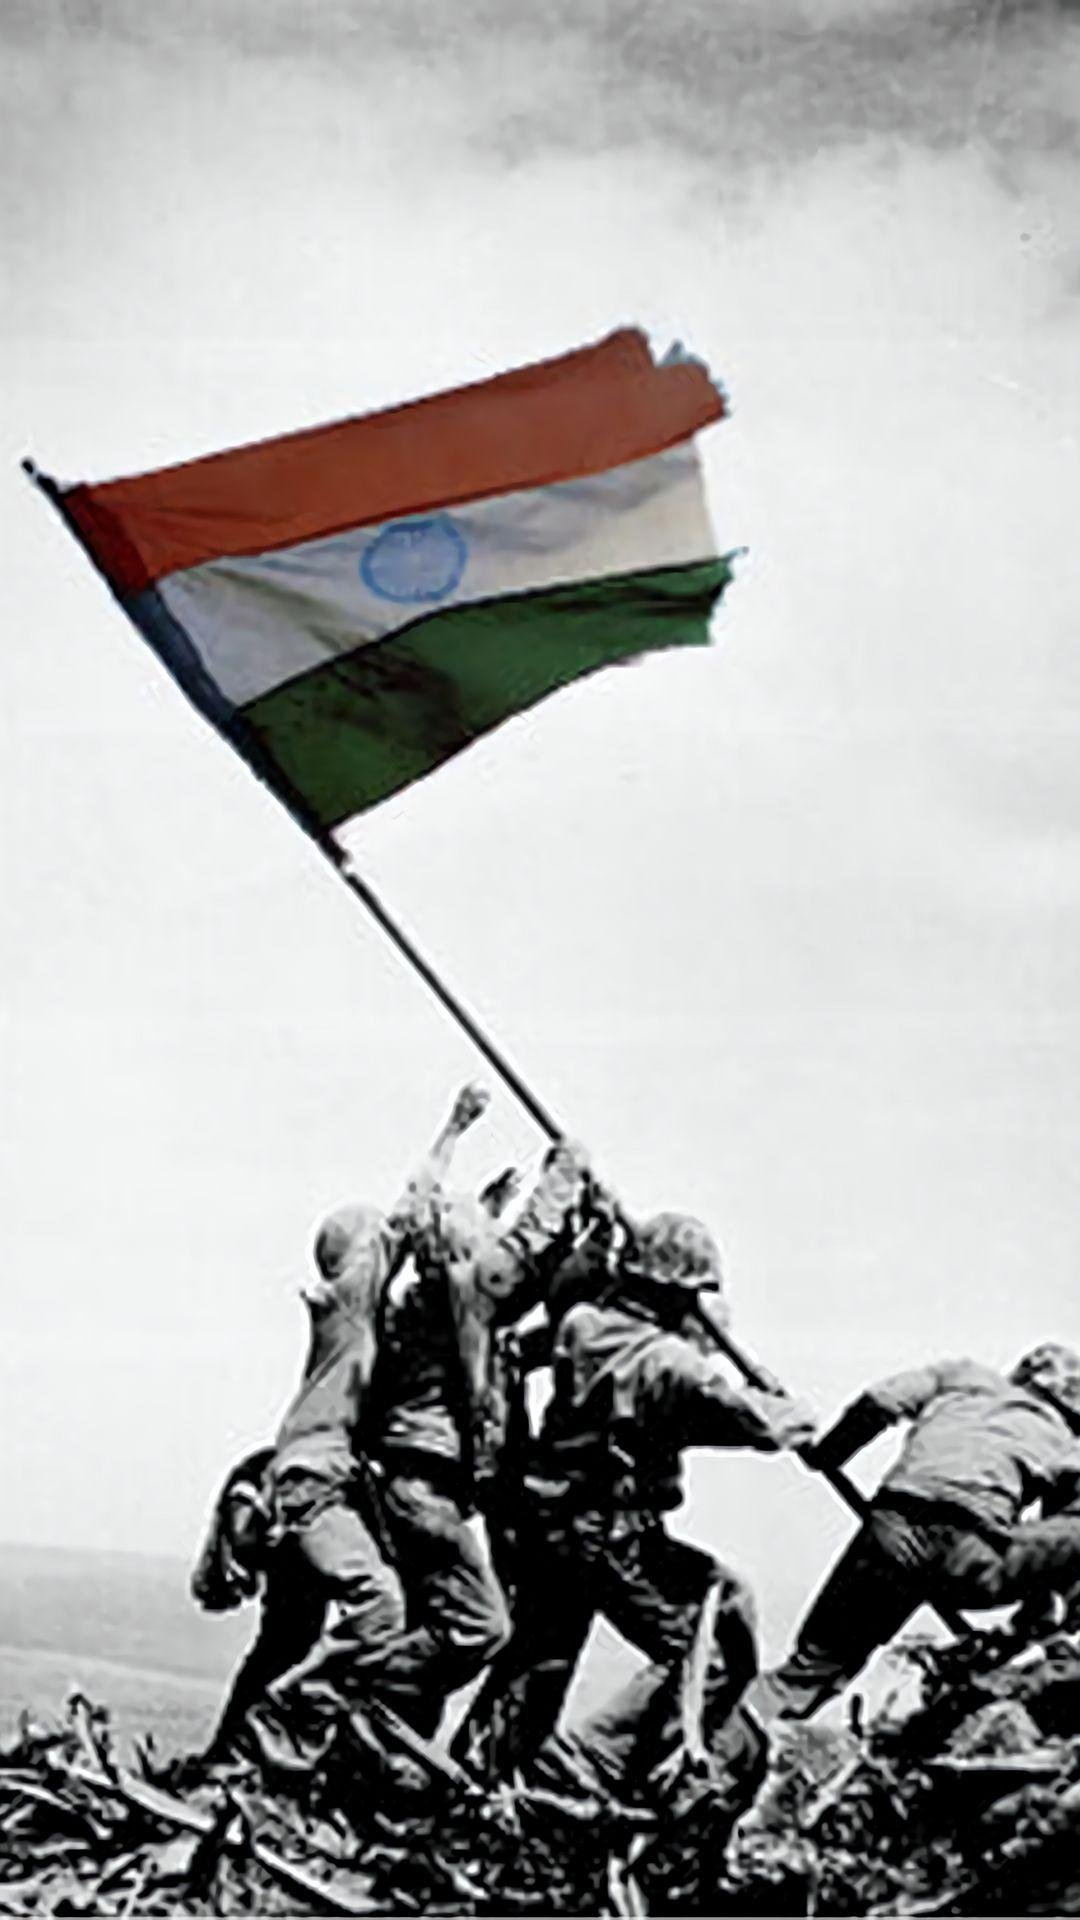 indian army flag wallpaper